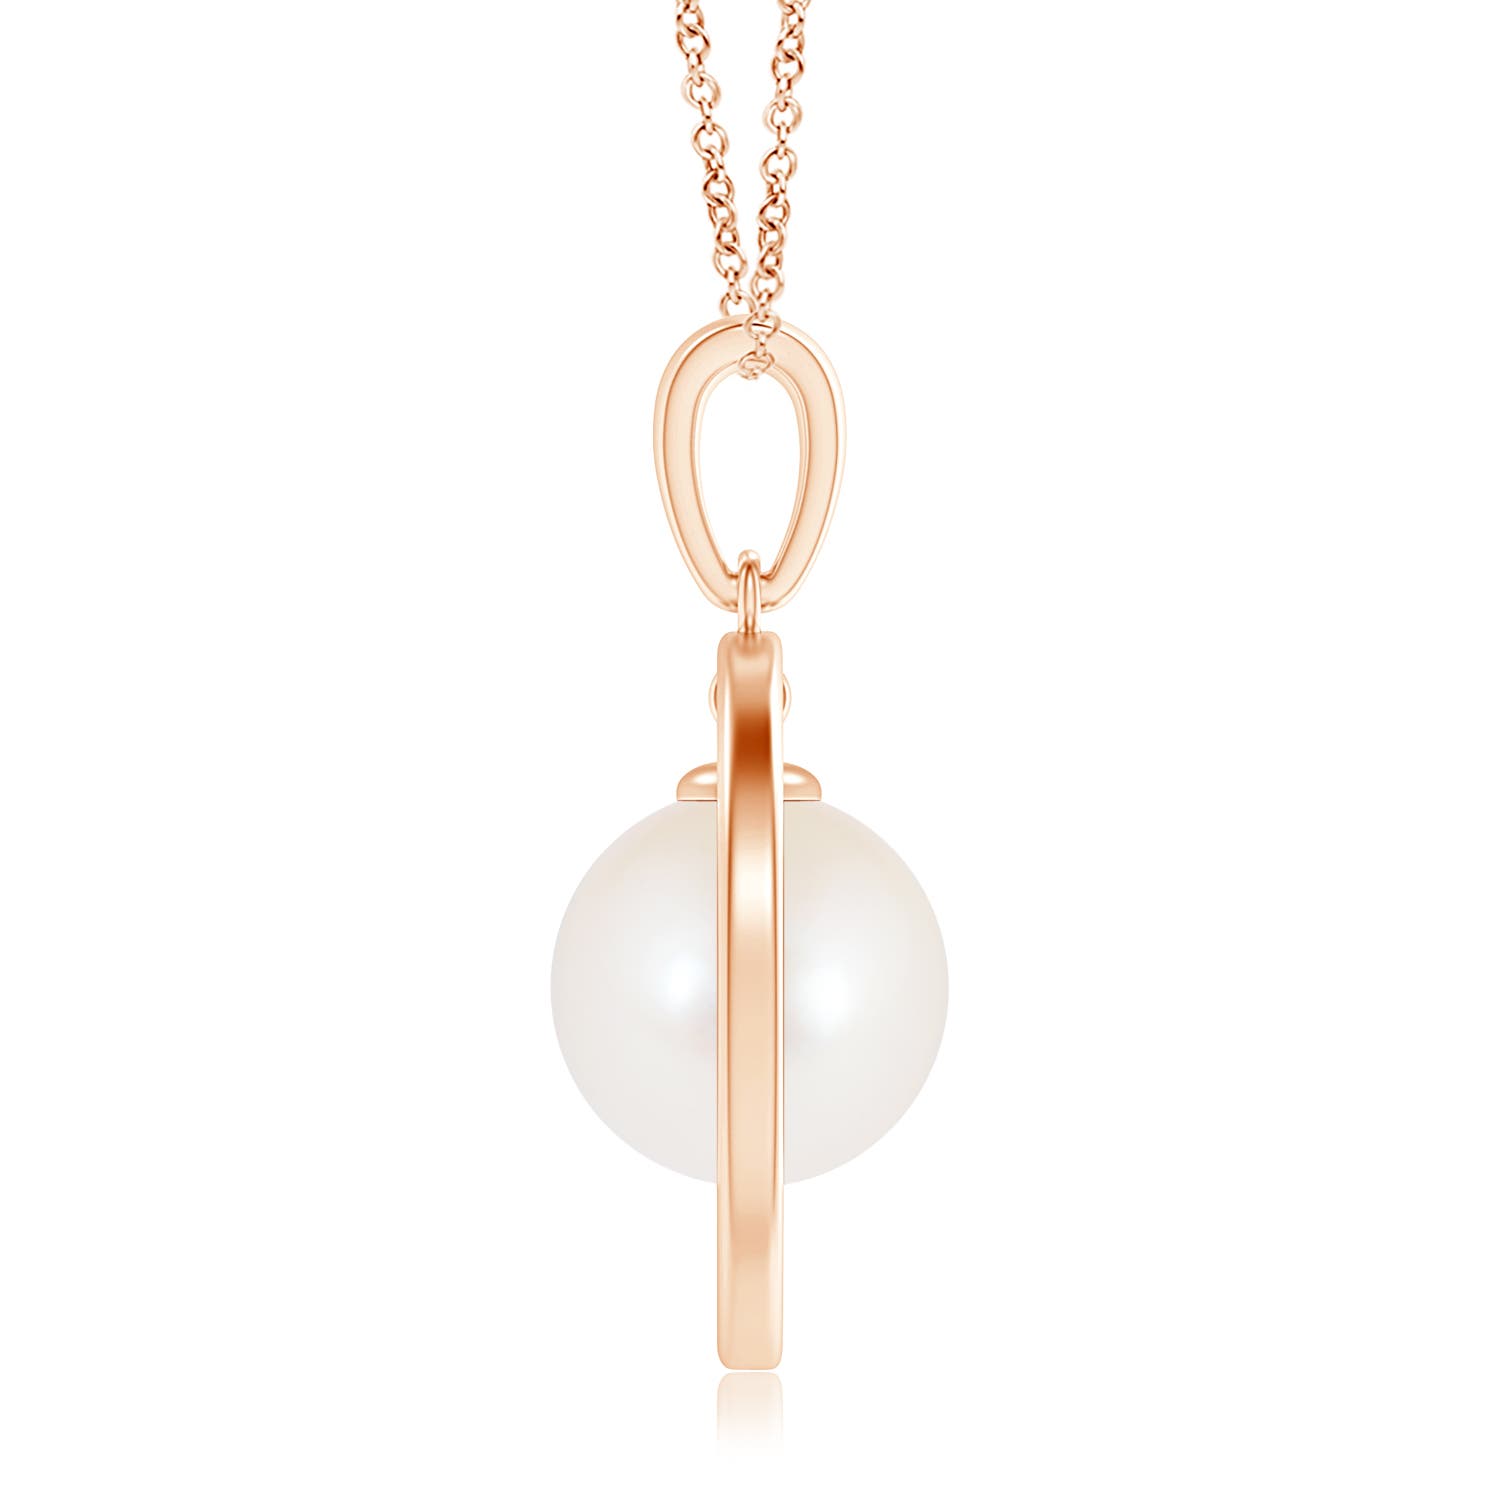 AAA - Freshwater Cultured Pearl / 7.2 CT / 14 KT Rose Gold